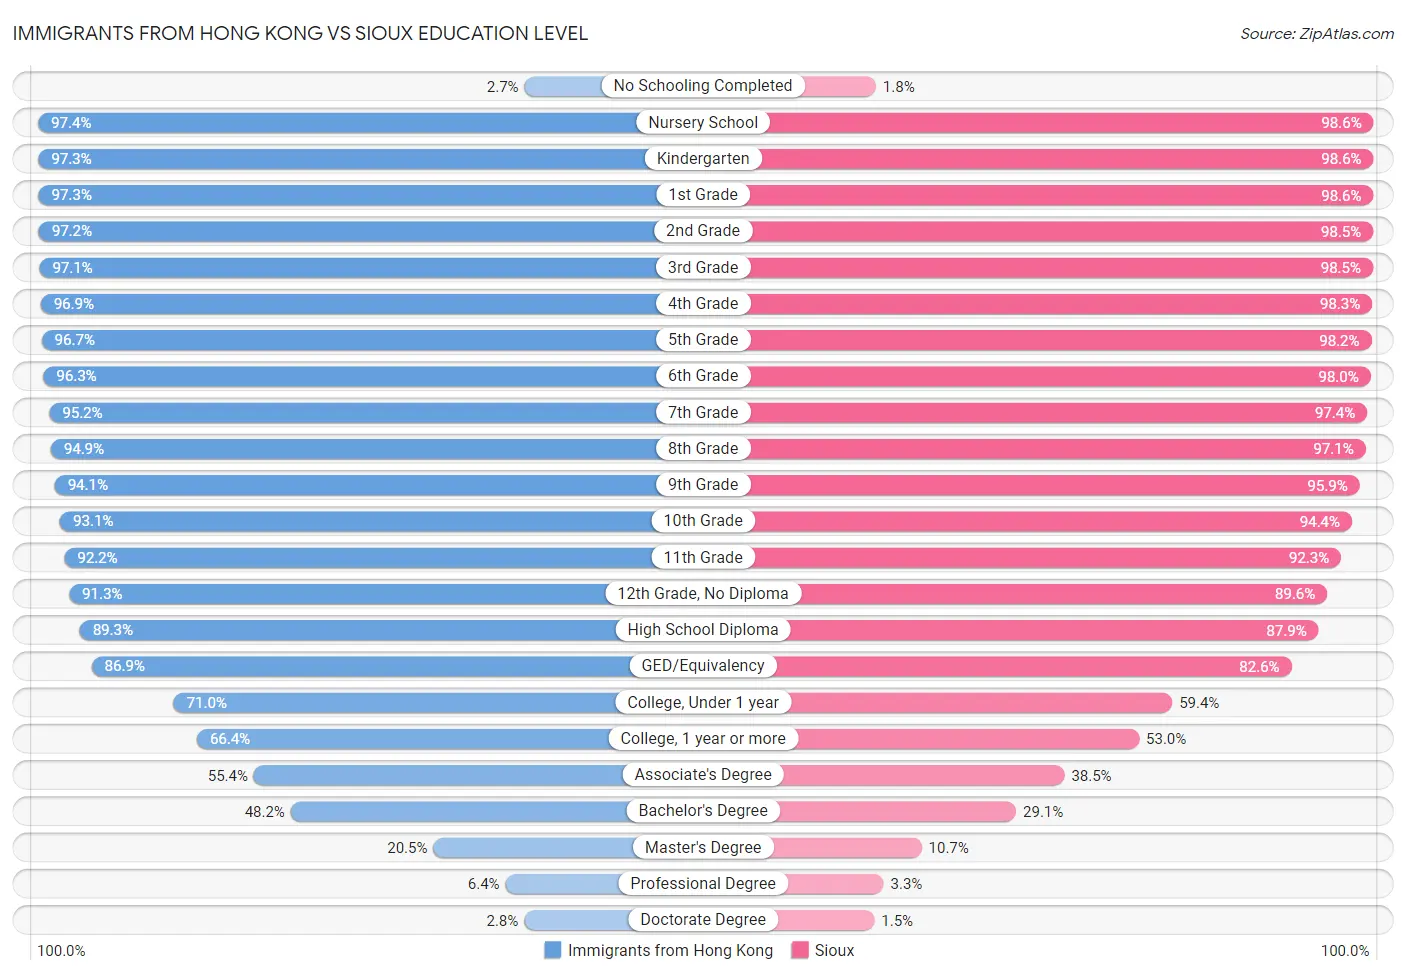 Immigrants from Hong Kong vs Sioux Education Level